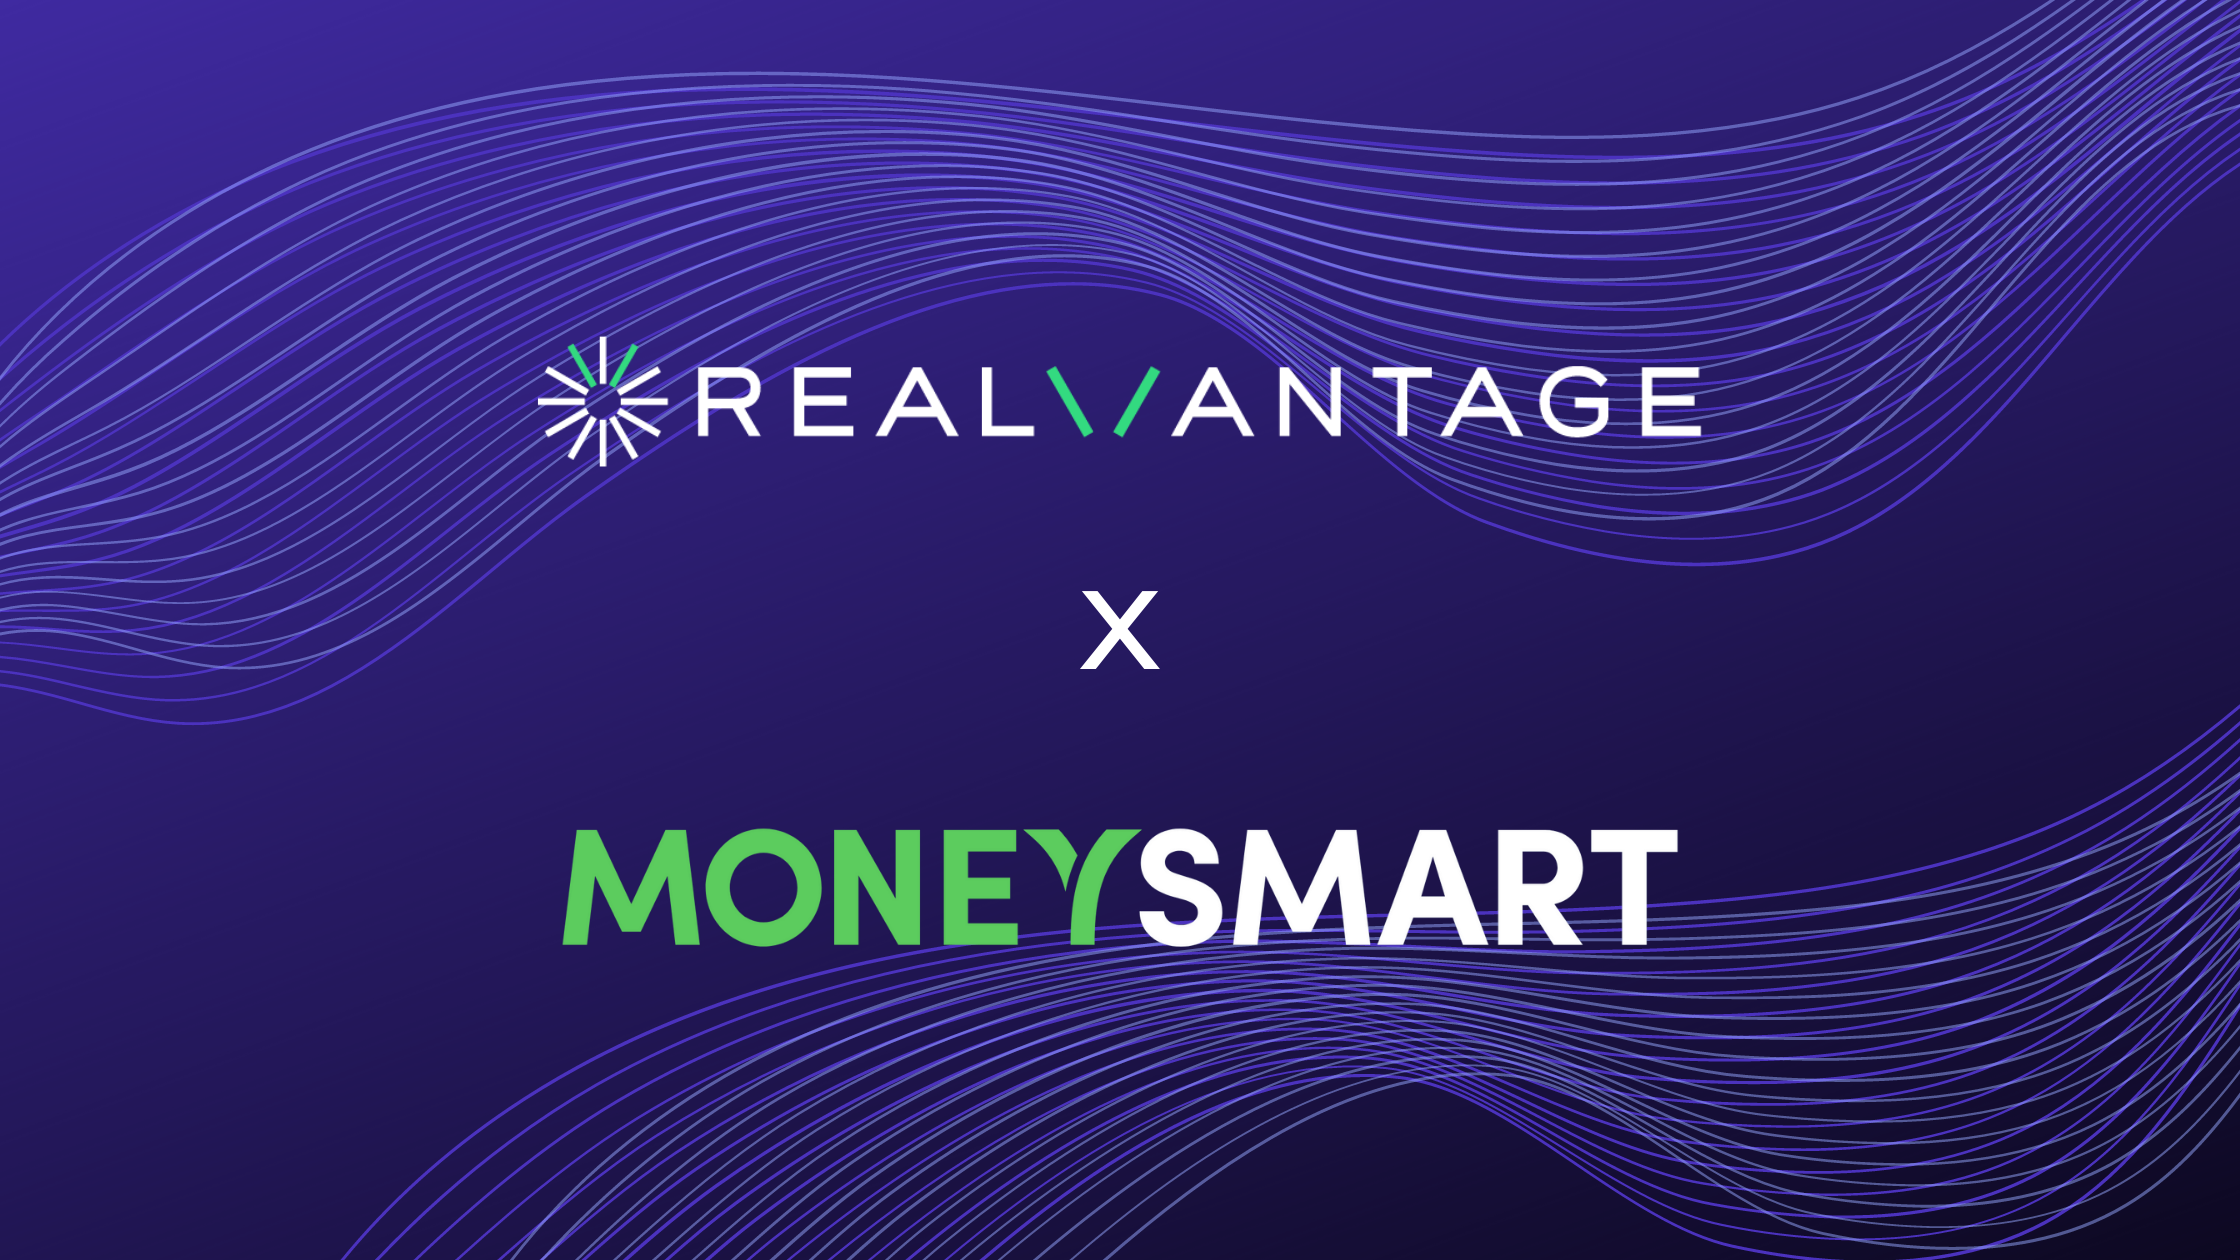 MoneySmart: Why This Property Investment Platform is a Game Changer